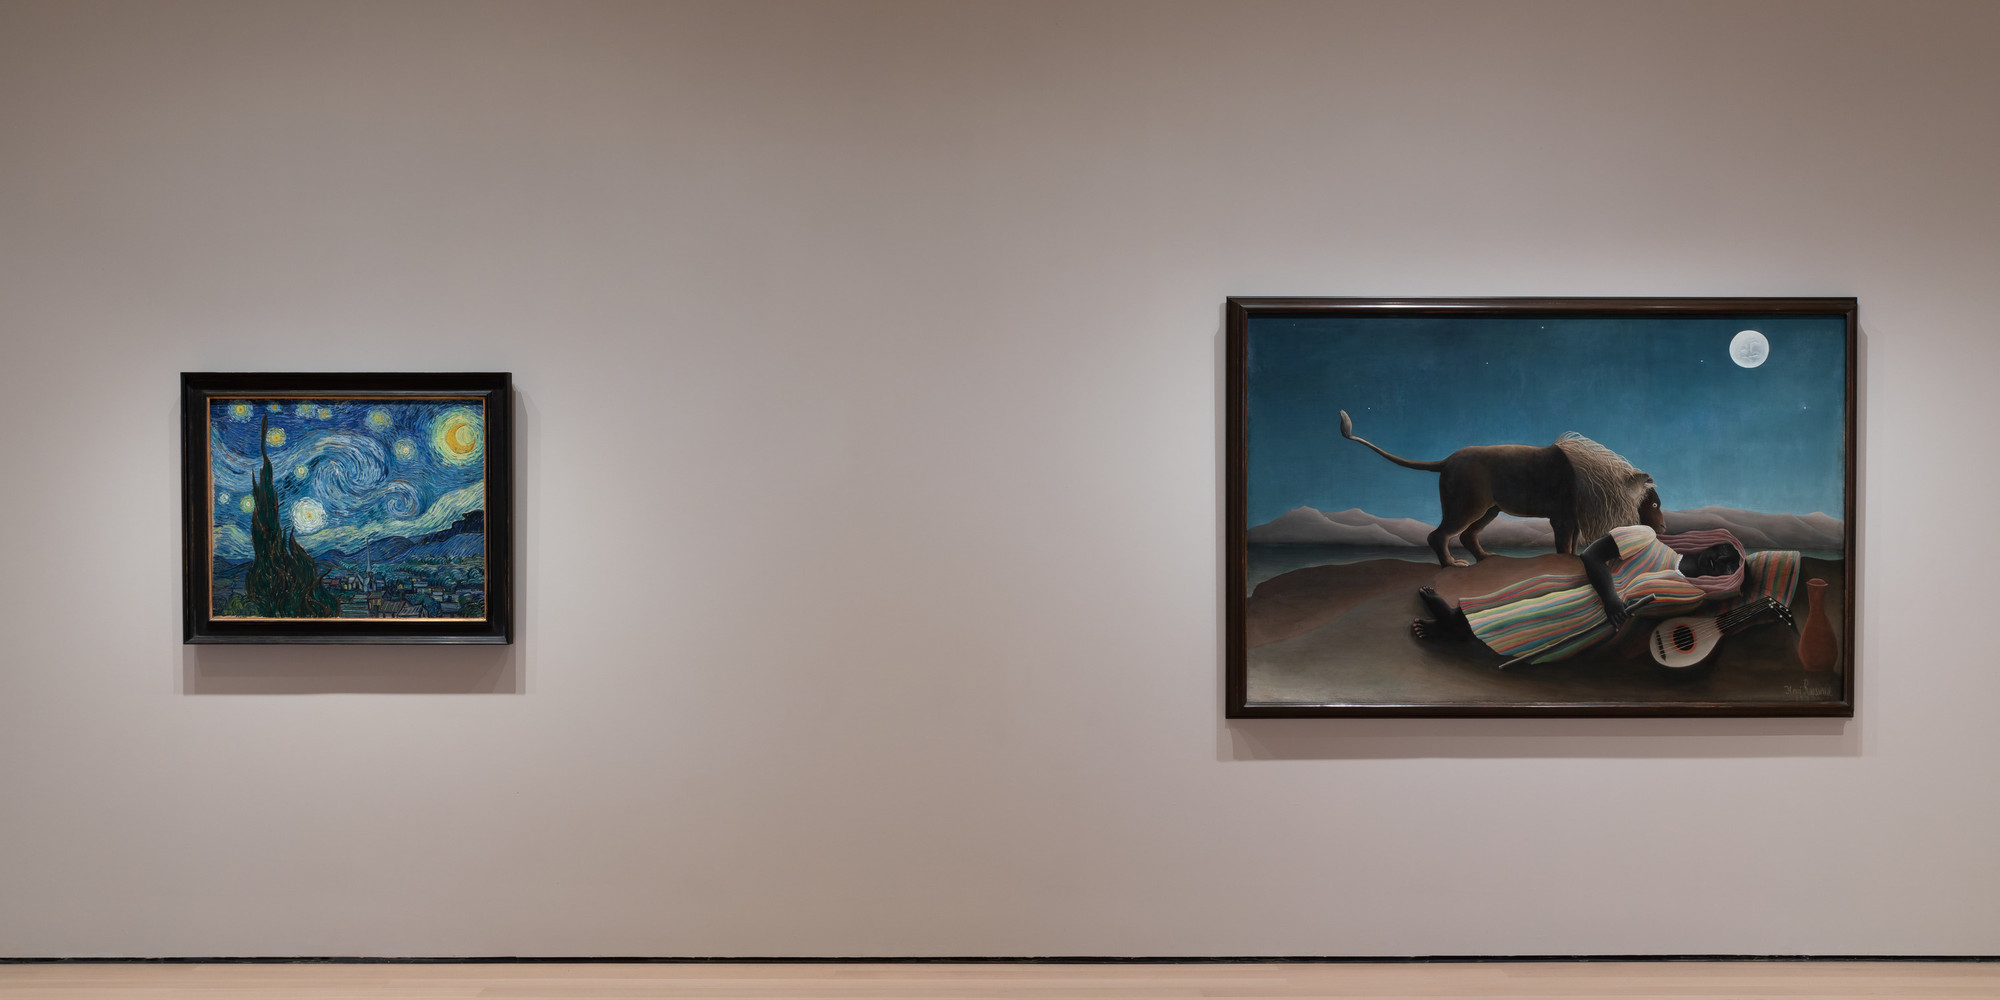 Installation view of the fifth-floor collection galleries, 2019. Shown, from left: Vincent van Gogh. The Starry Night. 1889. Oil on canvas. 29 × 36 1/4&#34; (73.7 × 92.1 cm). Acquired through the Lillie P. Bliss Bequest (by exchange). Conservation was made possible by the Bank of America Art Conservation Project; Henri Rousseau. The Sleeping Gypsy. 1897. Oil on canvas, 51&#34; × 6&#39; 7&#34; (129.5 × 200.7 cm). Gift of Mrs. Simon Guggenheim